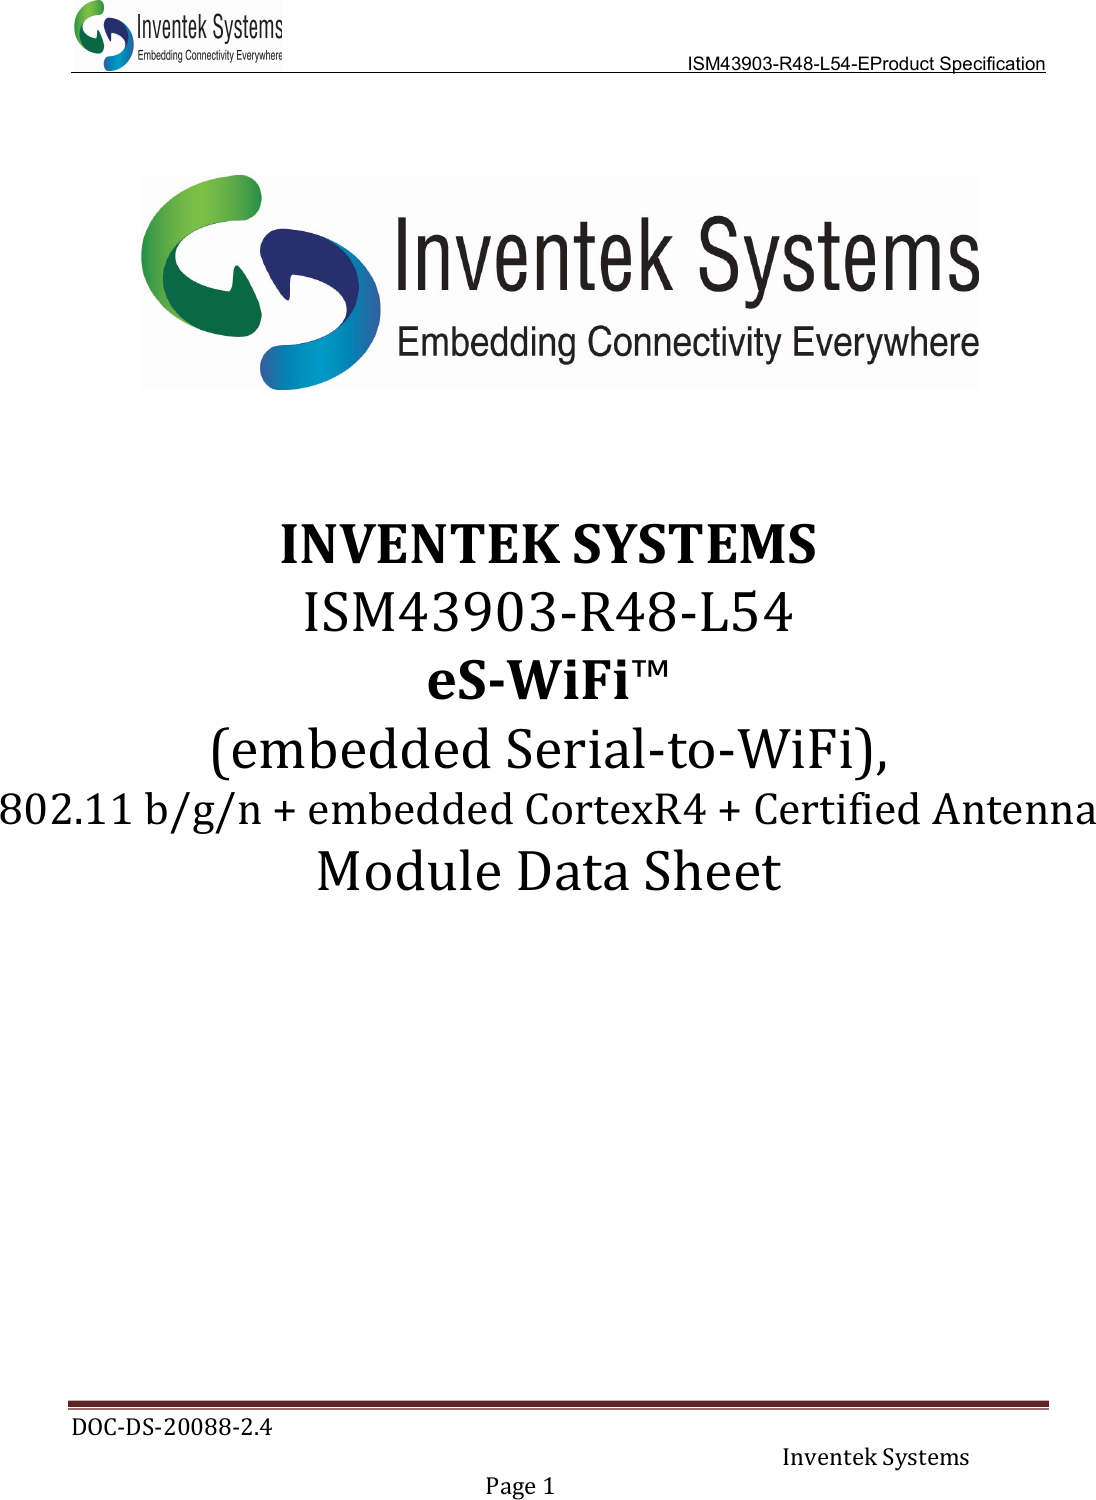   ISM43903-R48-L54-EProduct Specification DOC-DS-20088-2.4     Inventek Systems   Page 1                 INVENTEK SYSTEMS ISM43903-R48-L54 eS-WiFi™ (embedded Serial-to-WiFi),  802.11 b/g/n + embedded CortexR4 + Certified Antenna Module Data Sheet    